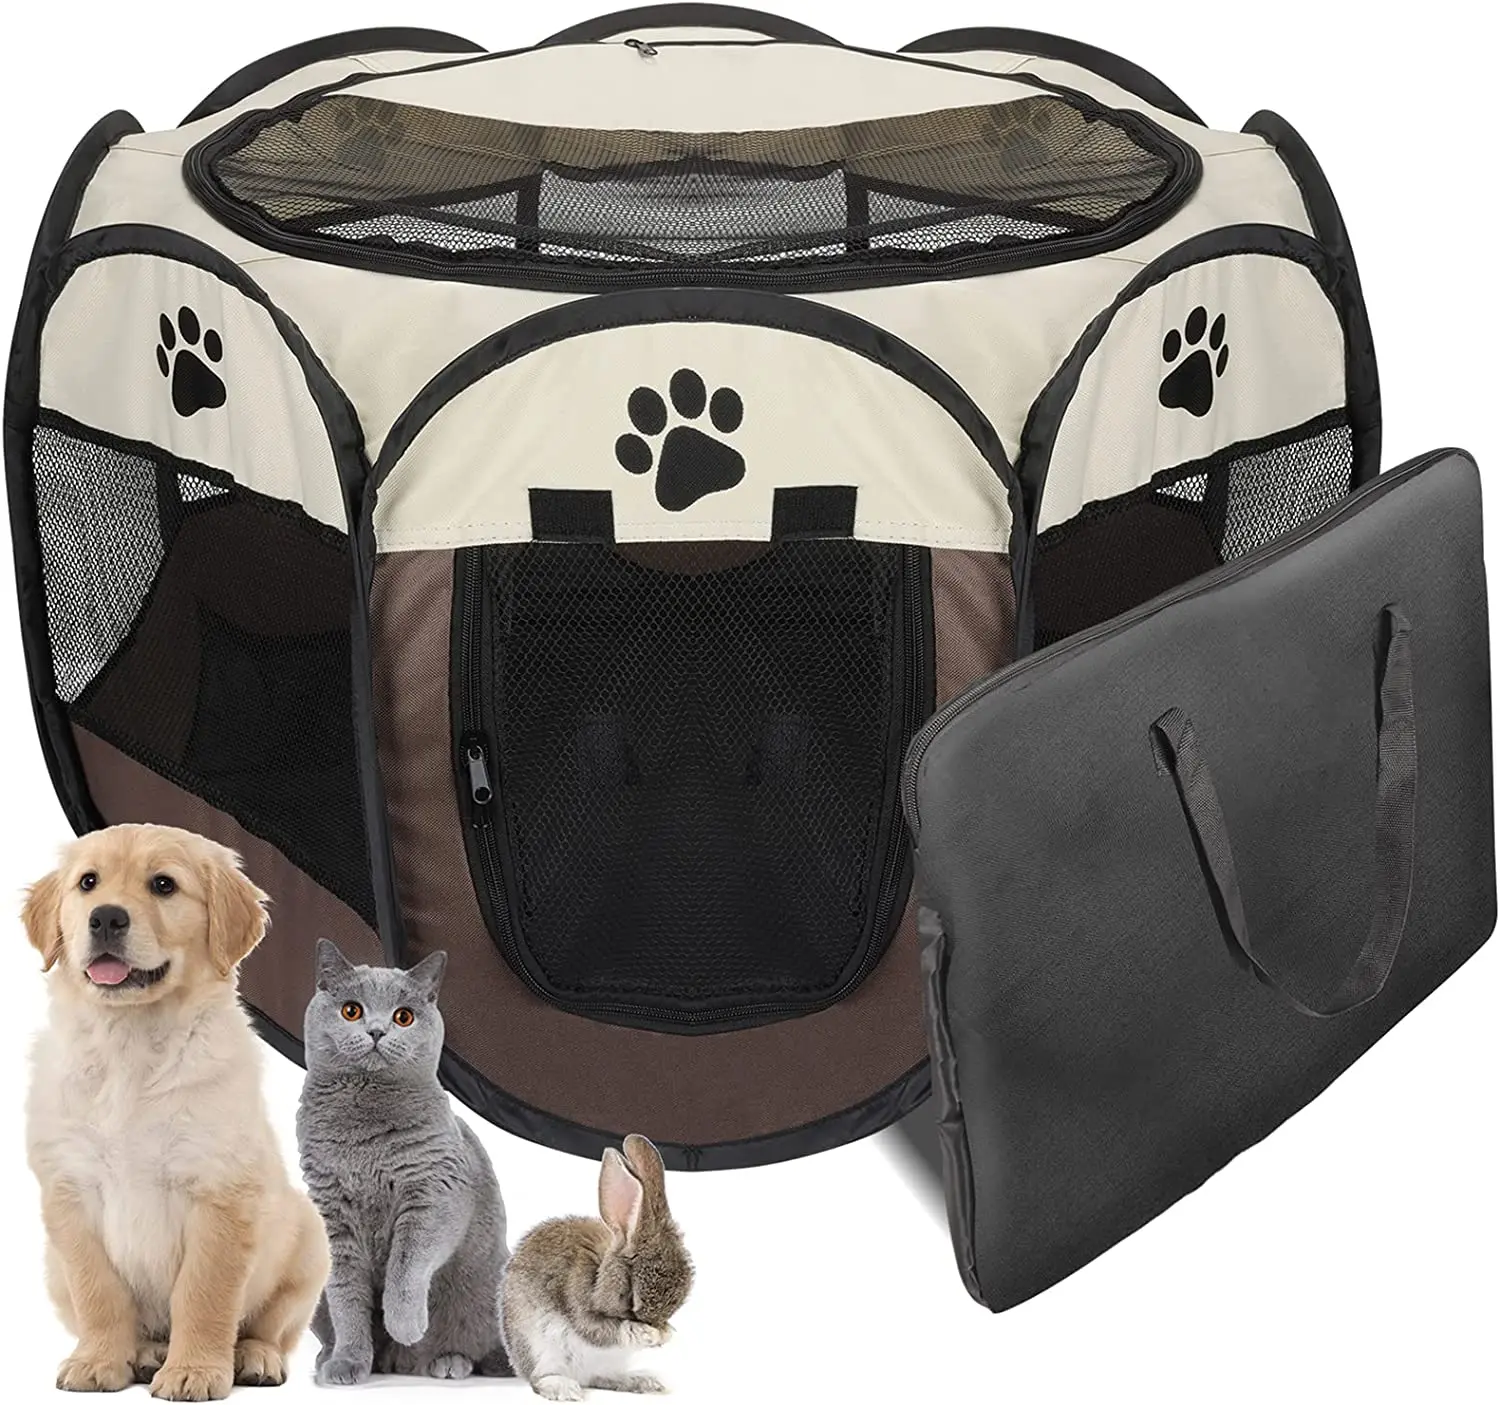 

ZOOBERS Pet Playpen Foldable Dog Playpens Portable Exercise Kennel Tent for Cats/Rabbits Play Tent Removable Mesh Cover